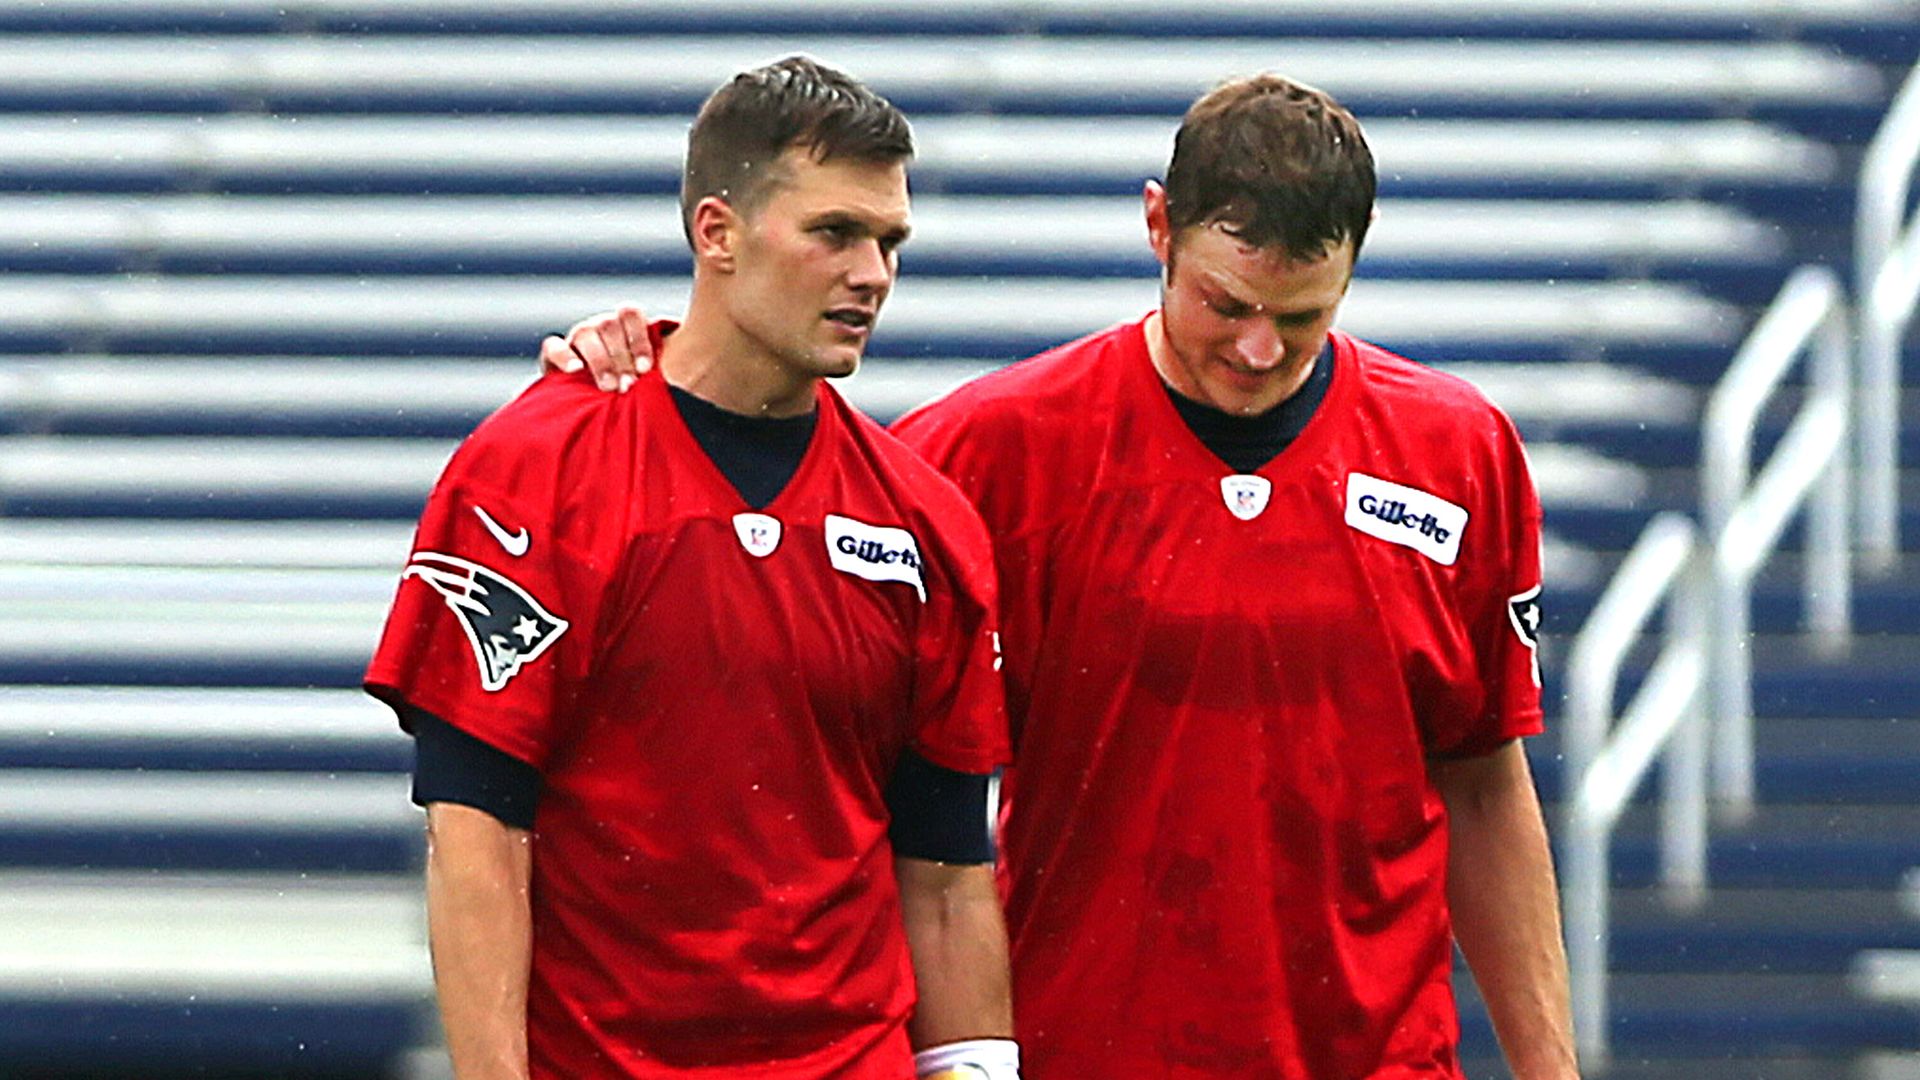 Tom Brady and Ryan Mallett played for the New England Patriots